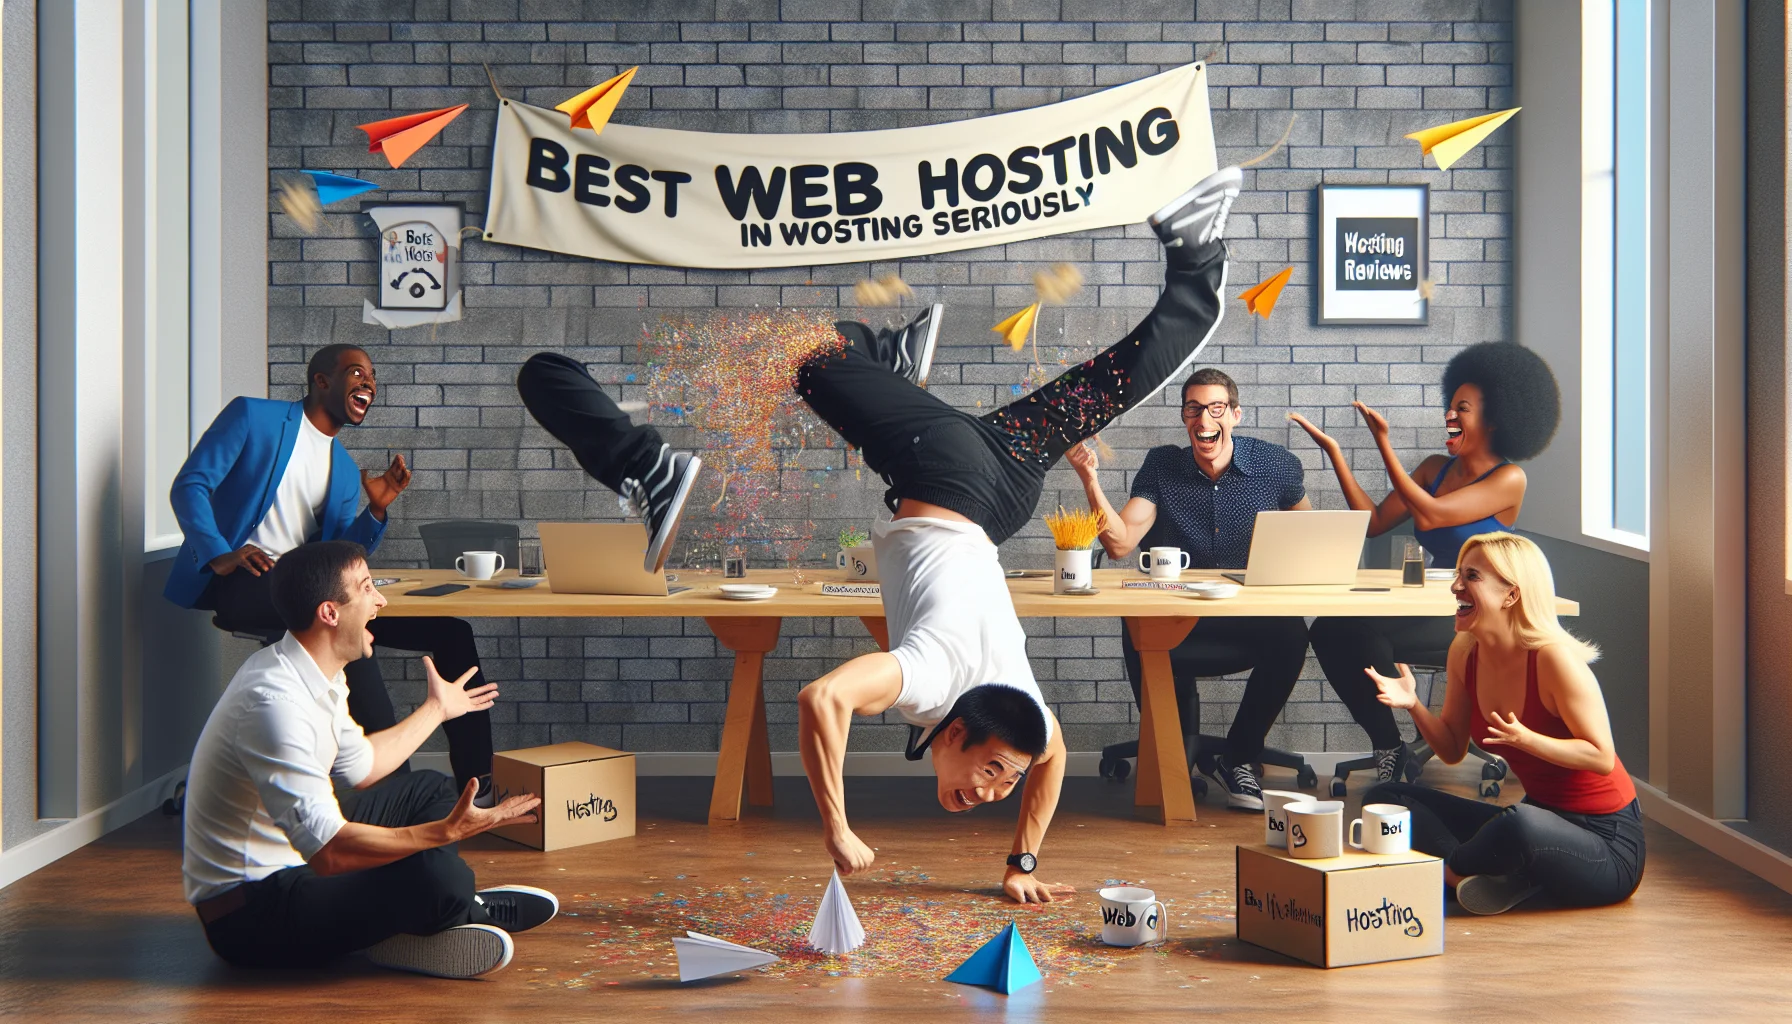 Visualise a humorous scenario set in a web hosting company's office. An energetic, Asian employee is presenting a break dance performance to lighten the mood, unexpectedly, confetti erupting from his laptop. Another, a Black employee is seen laughing and throwing colorful paper planes all around. A humorous banner overhead reading, 'Best Web Hosting Reviews' swings slightly due to the fan. On the side, a Hispanic woman is raising a toast with a coffee mug bearing the words 'We take the 'hosting' in web hosting seriously'. The energy in the room is contagiously funny and positive with everyone enjoying the entertaining moments.